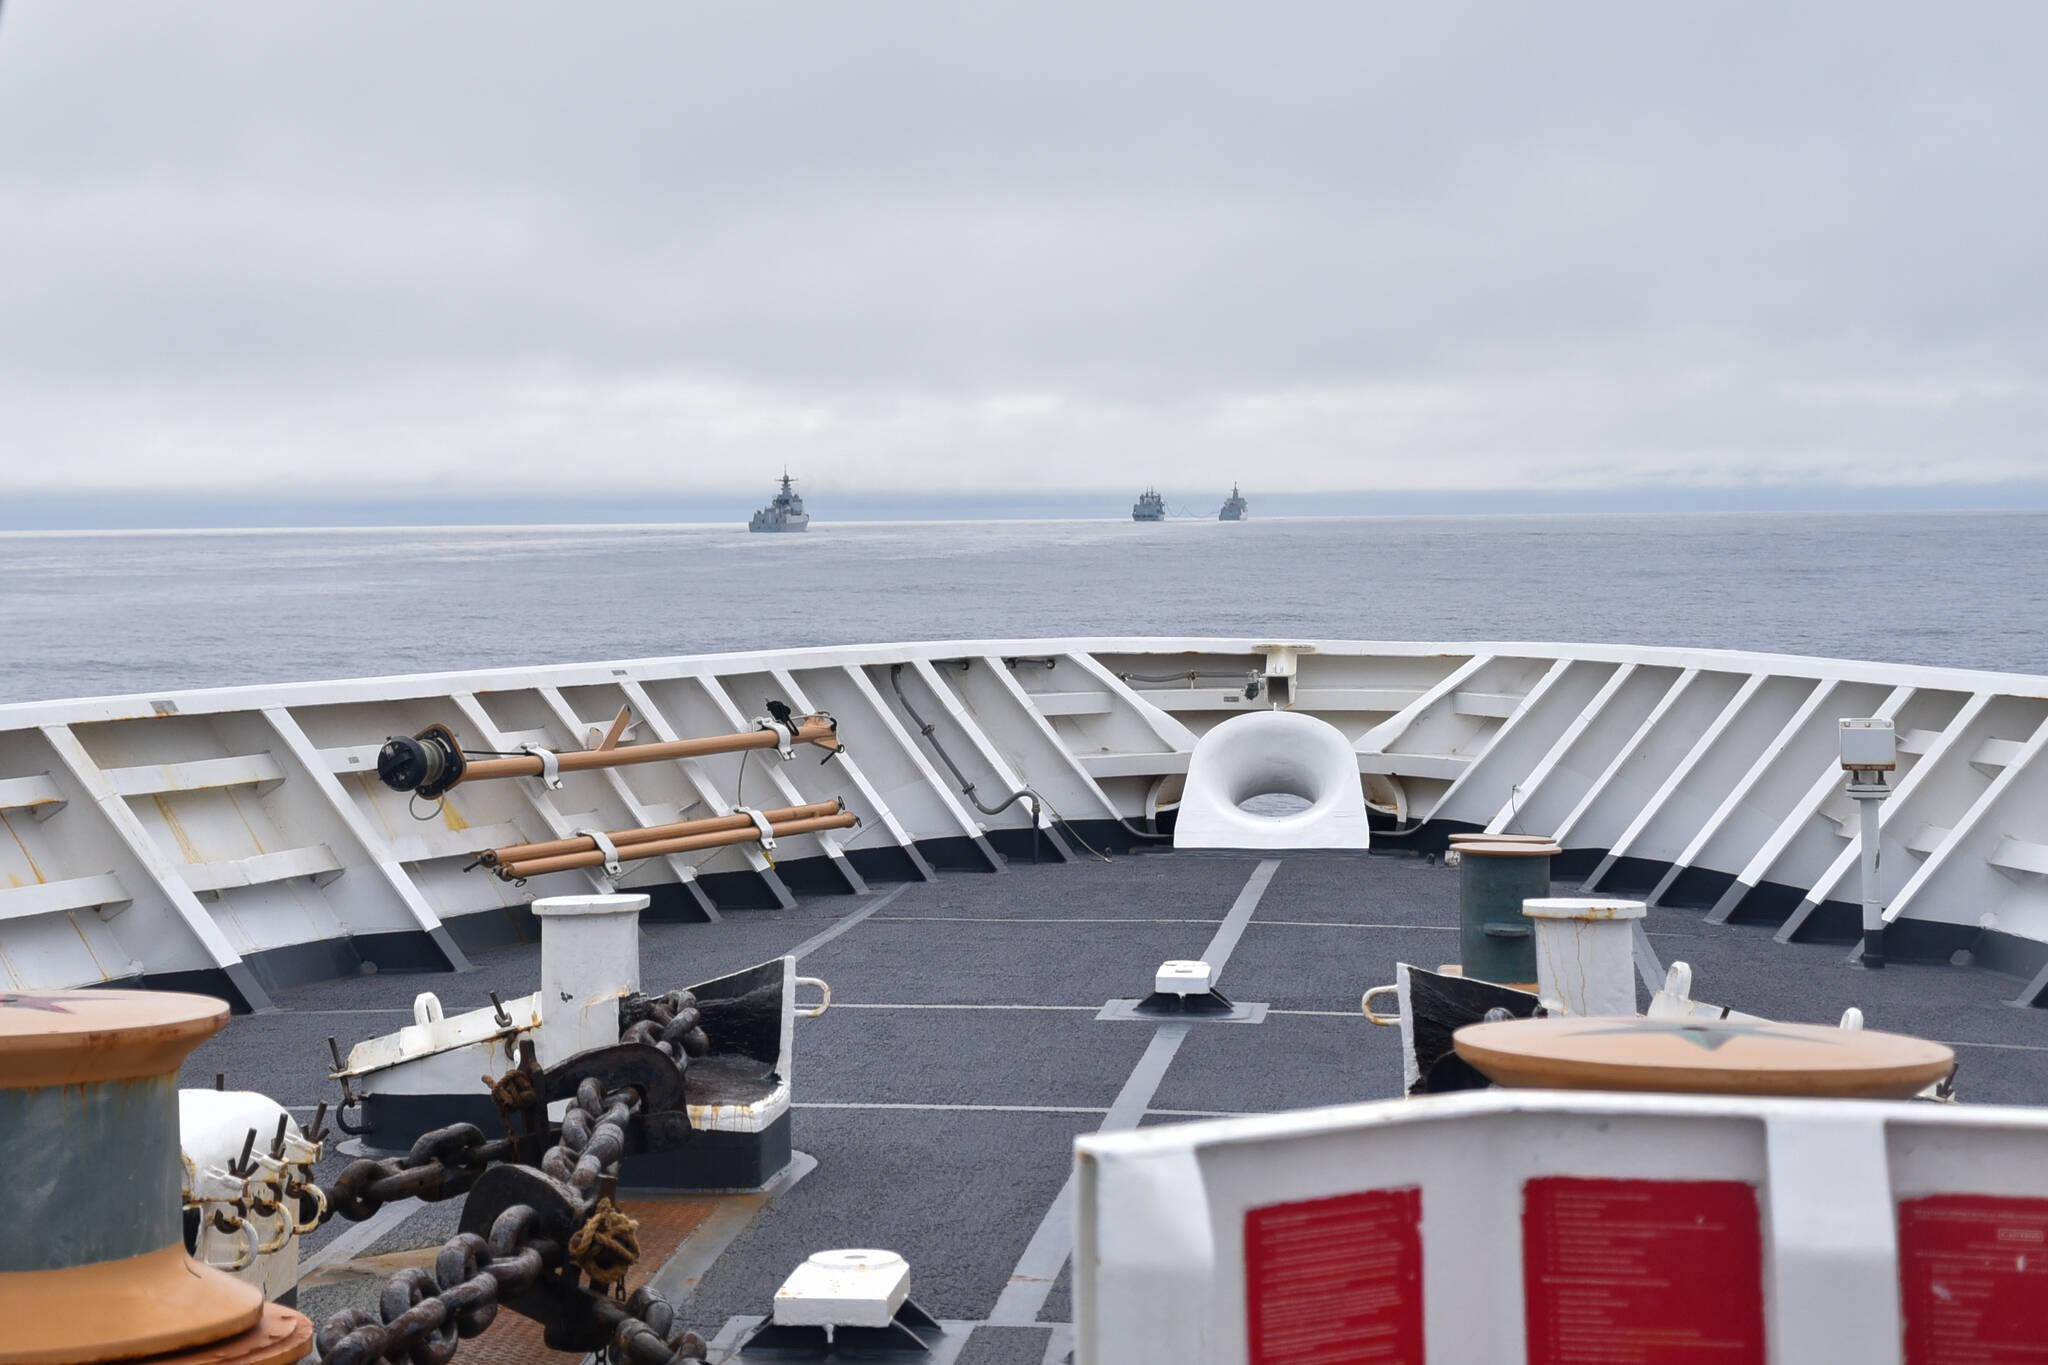 During a routine maritime patrol in the Bering Sea and Arctic region, U.S. Coast Guard Cutter Bertholf spotted and established radio contact with Chinese People’s Liberation Army Navy (PLAN) task force in international waters within the U.S. exclusive economic zone, Aug. 30, 2021. (Ensign Bridget Boyle / U.S. Coast Guard)